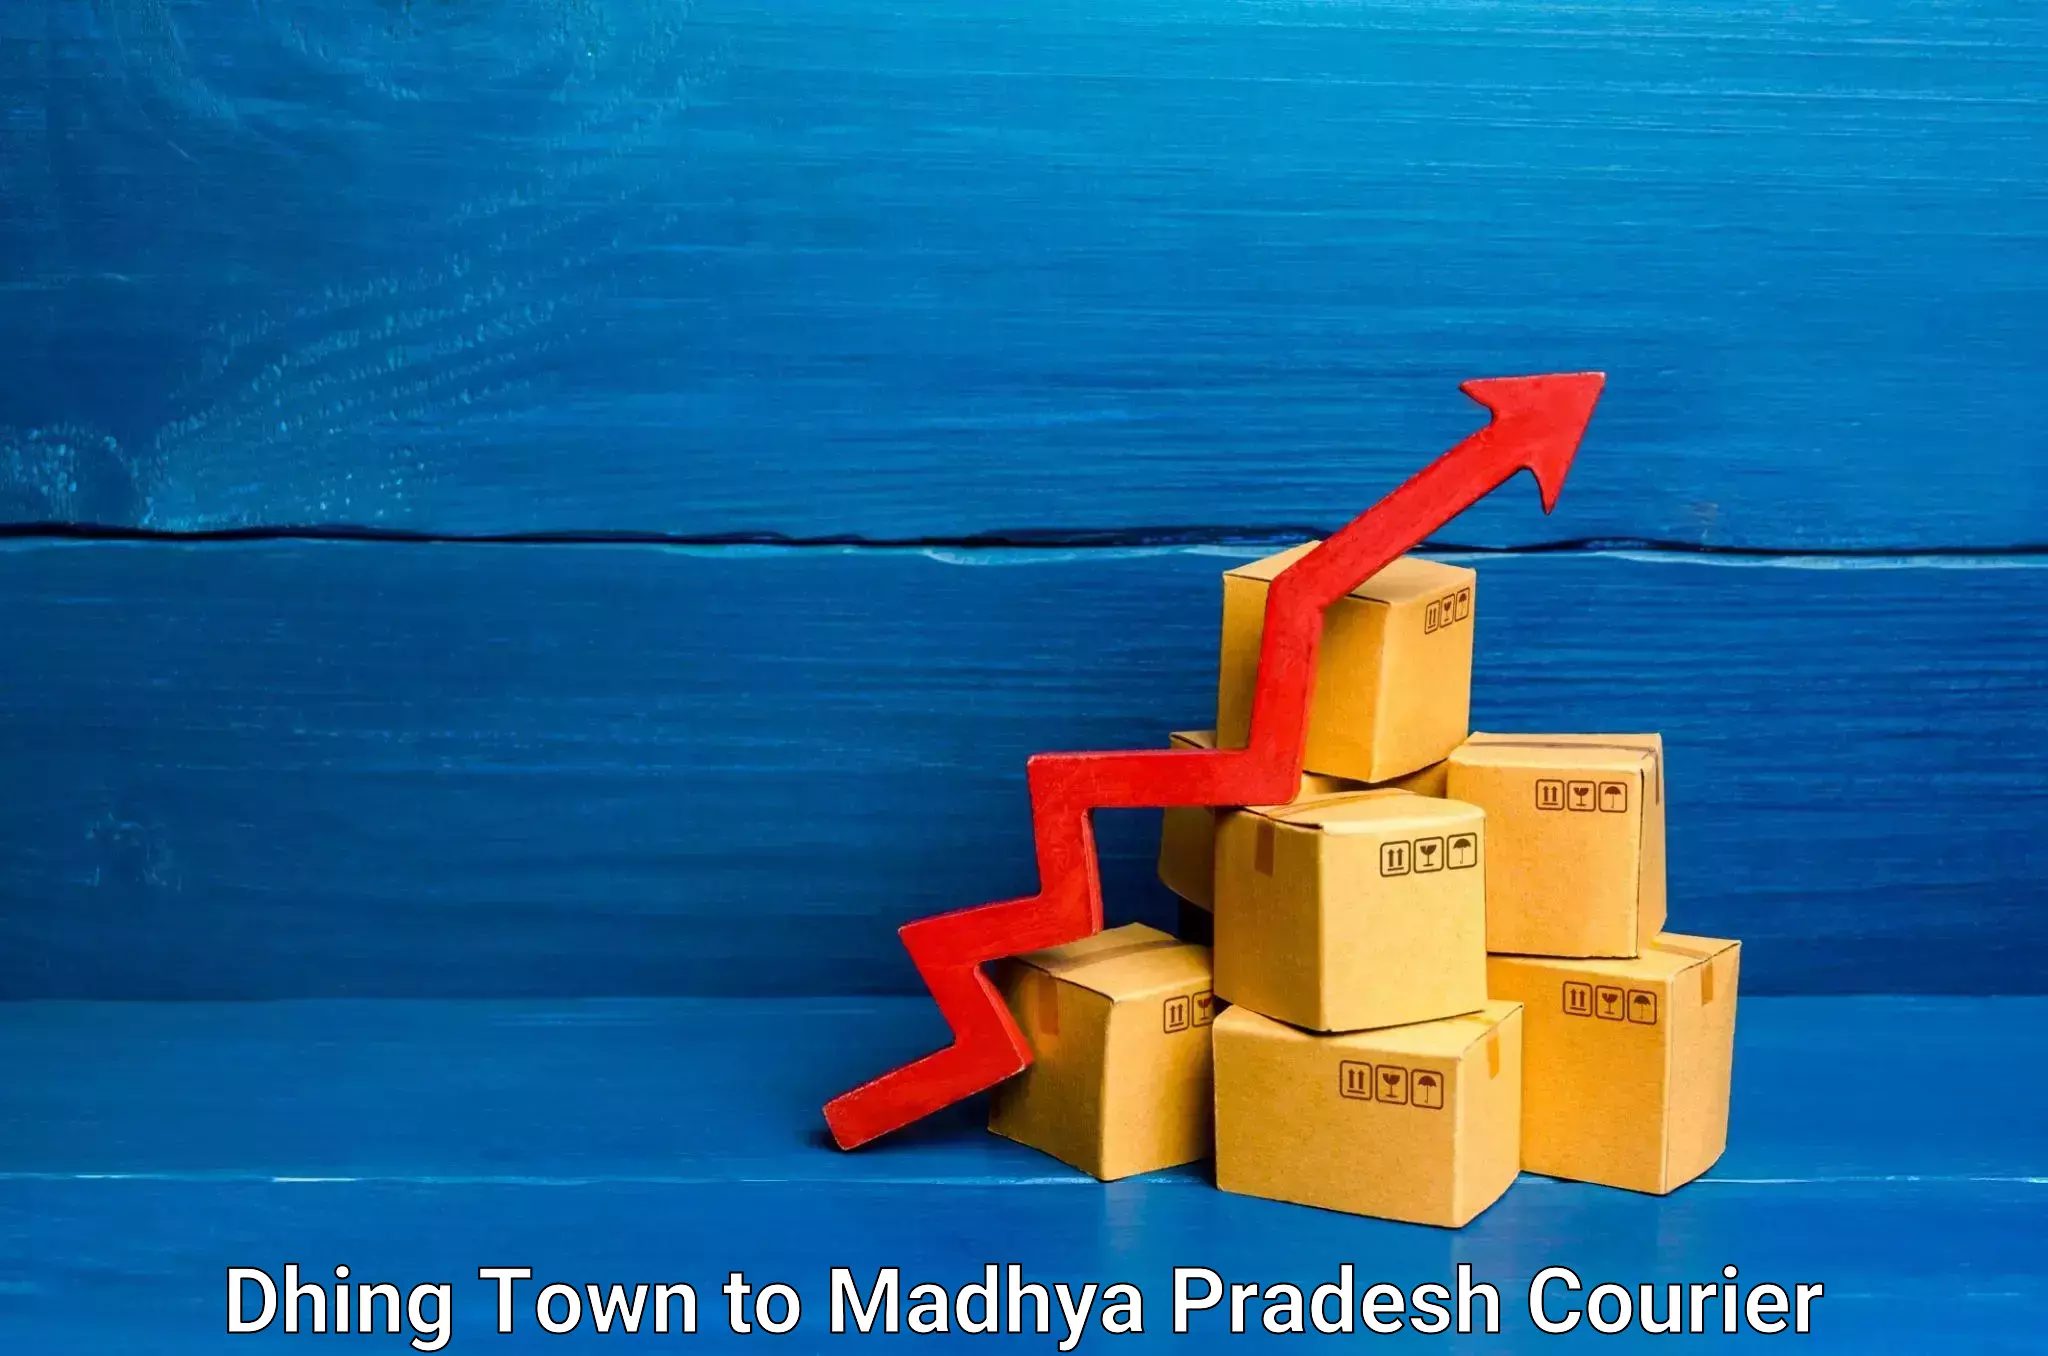 Global courier networks Dhing Town to Madhya Pradesh